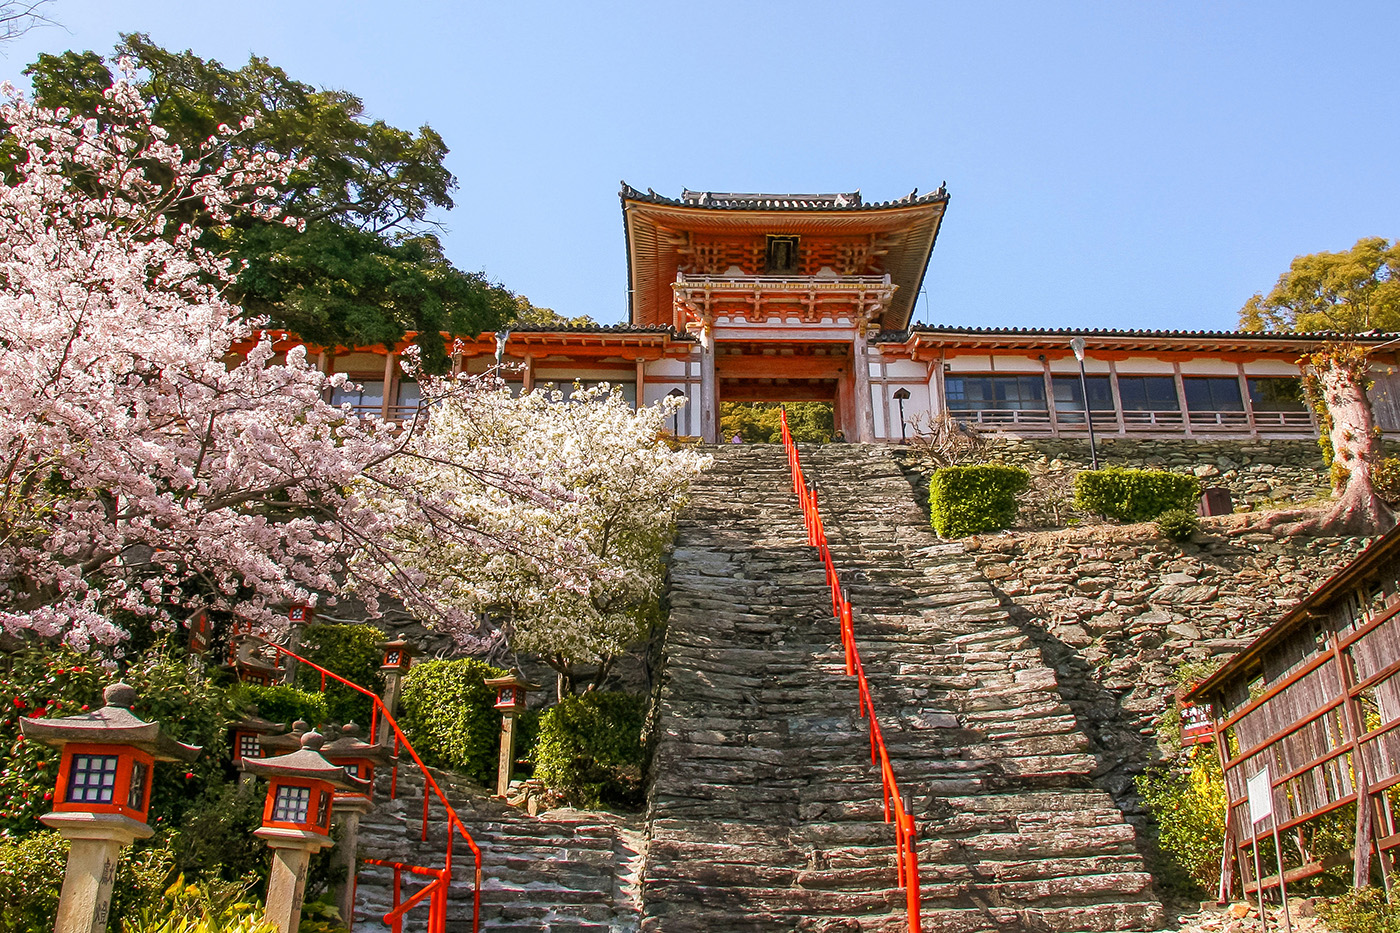 Wakayama's Wakaura Tenmangu Shrine comes alive with the arrival of cherry blossoms, offering a blend of cultural richness and natural splendor